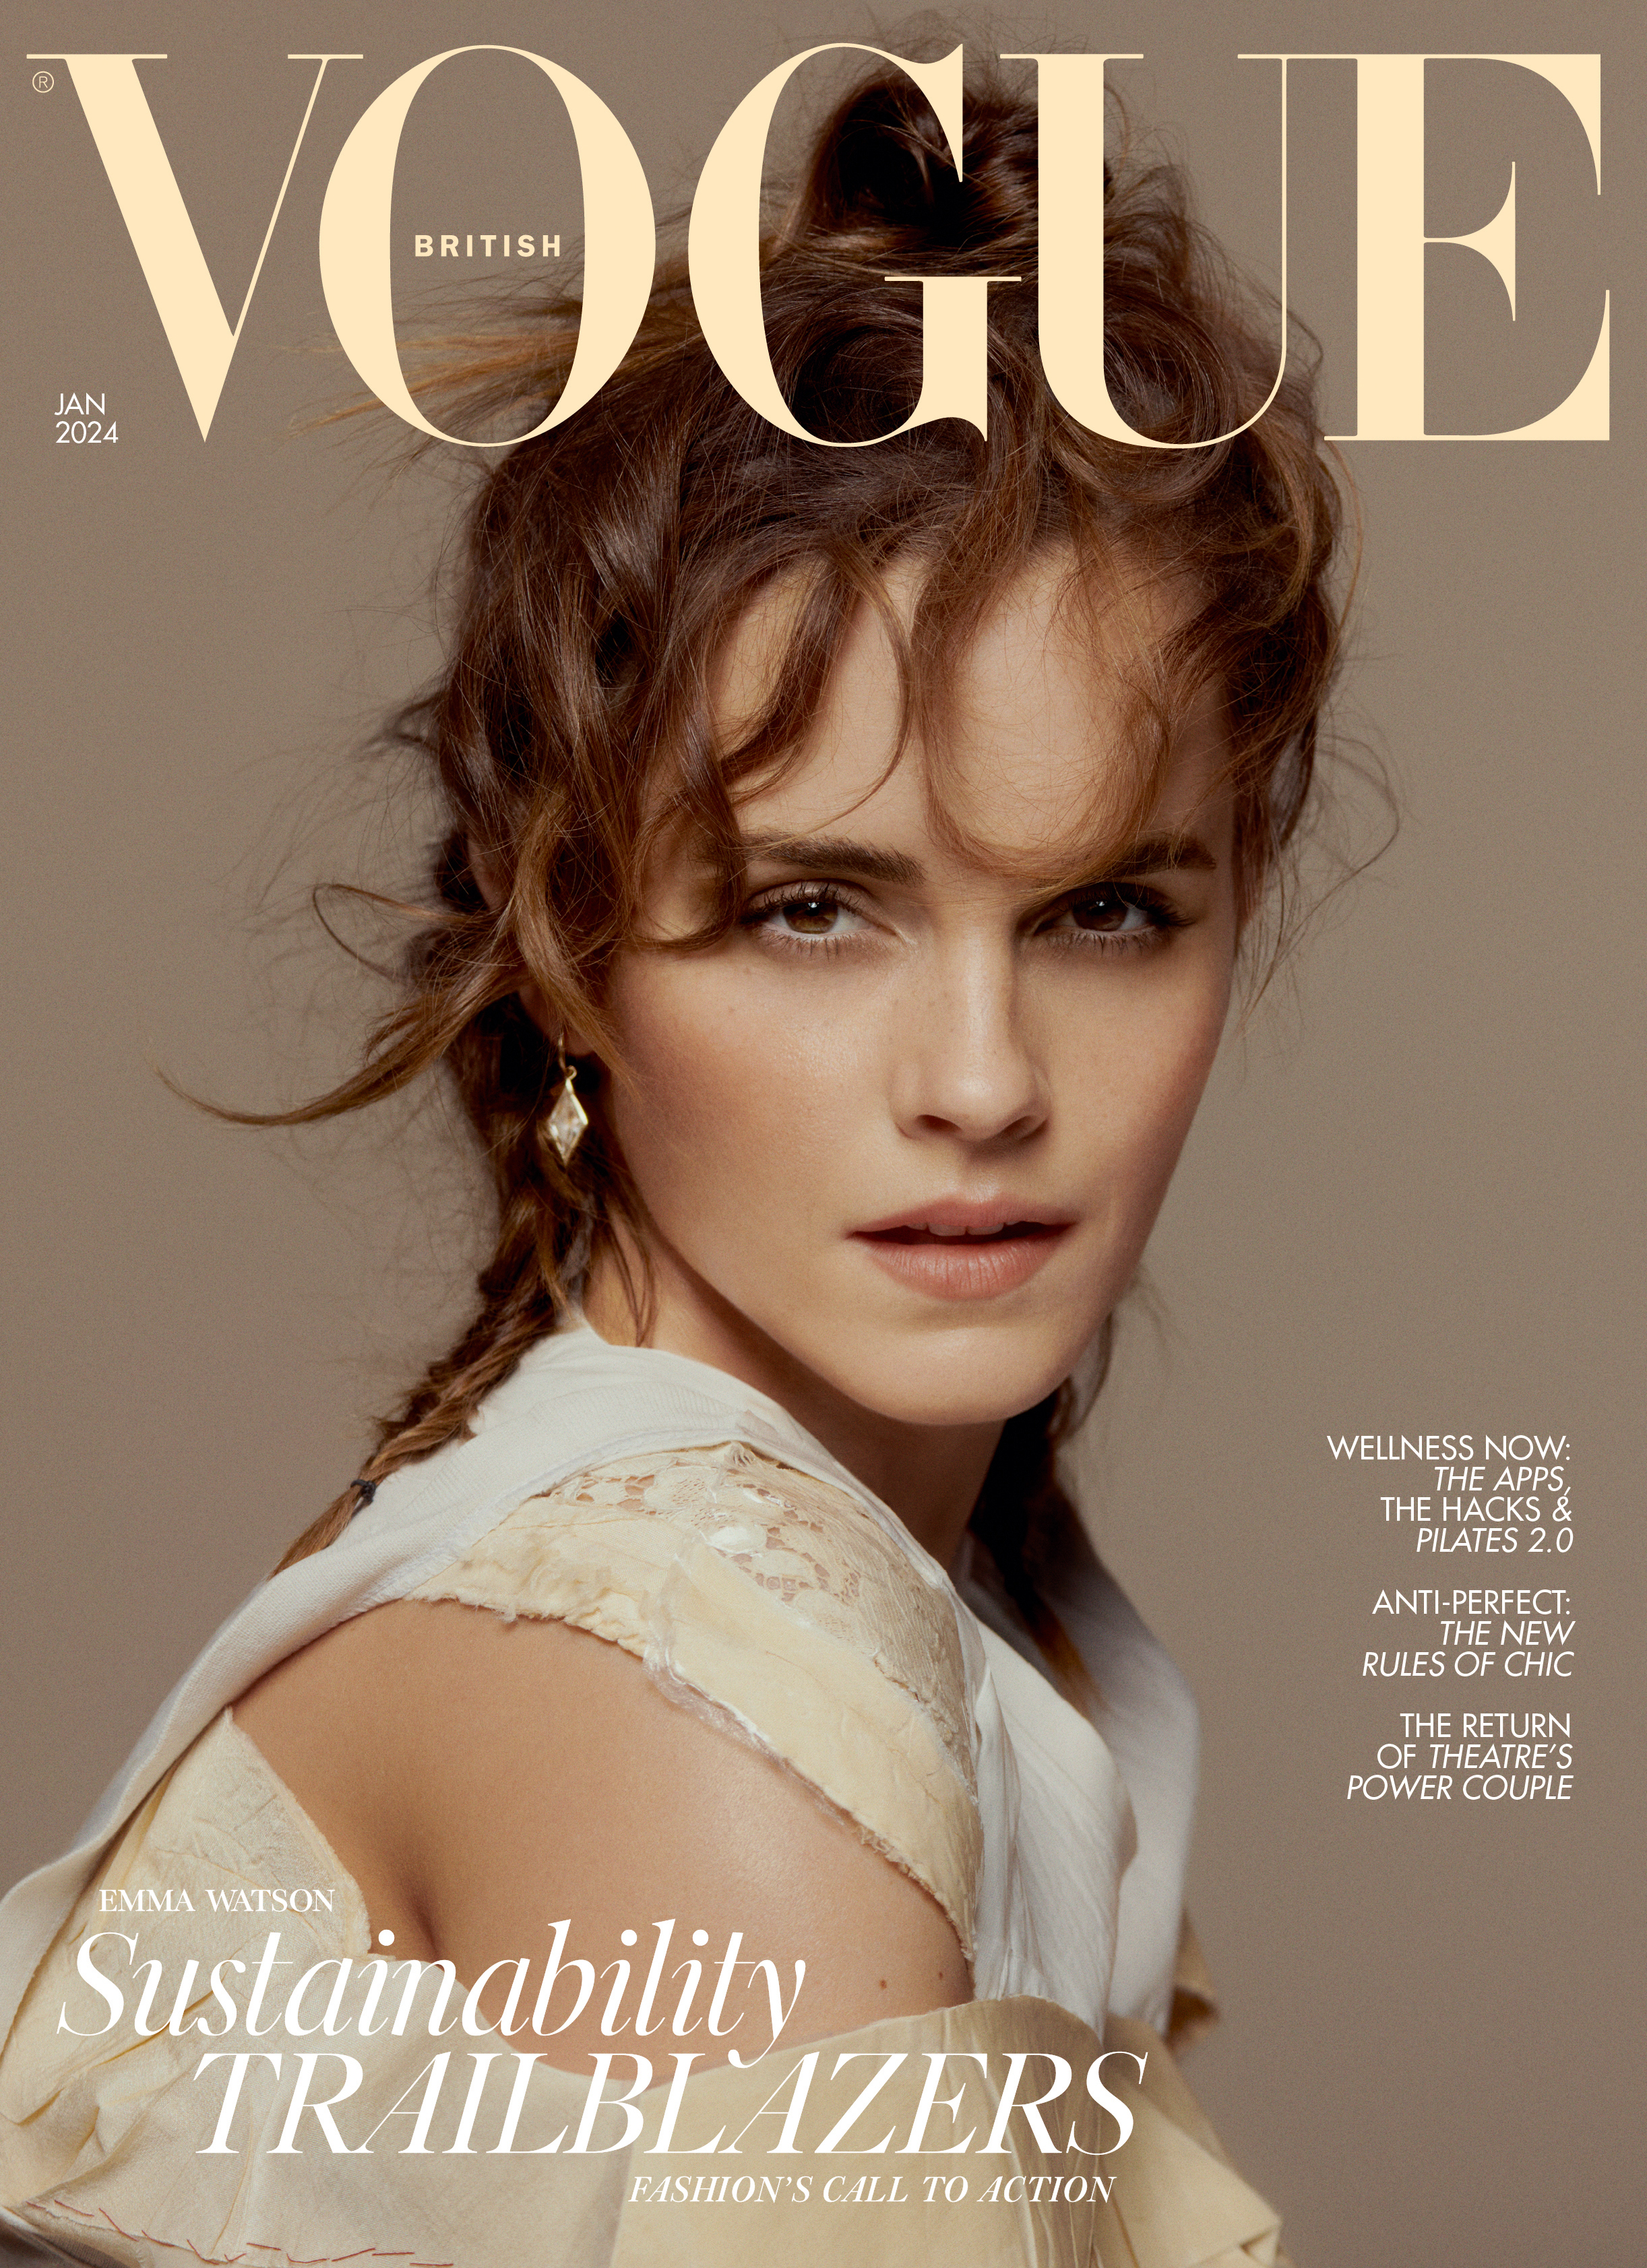 The January issue of British Vogue is out in stores and online on Tuesday